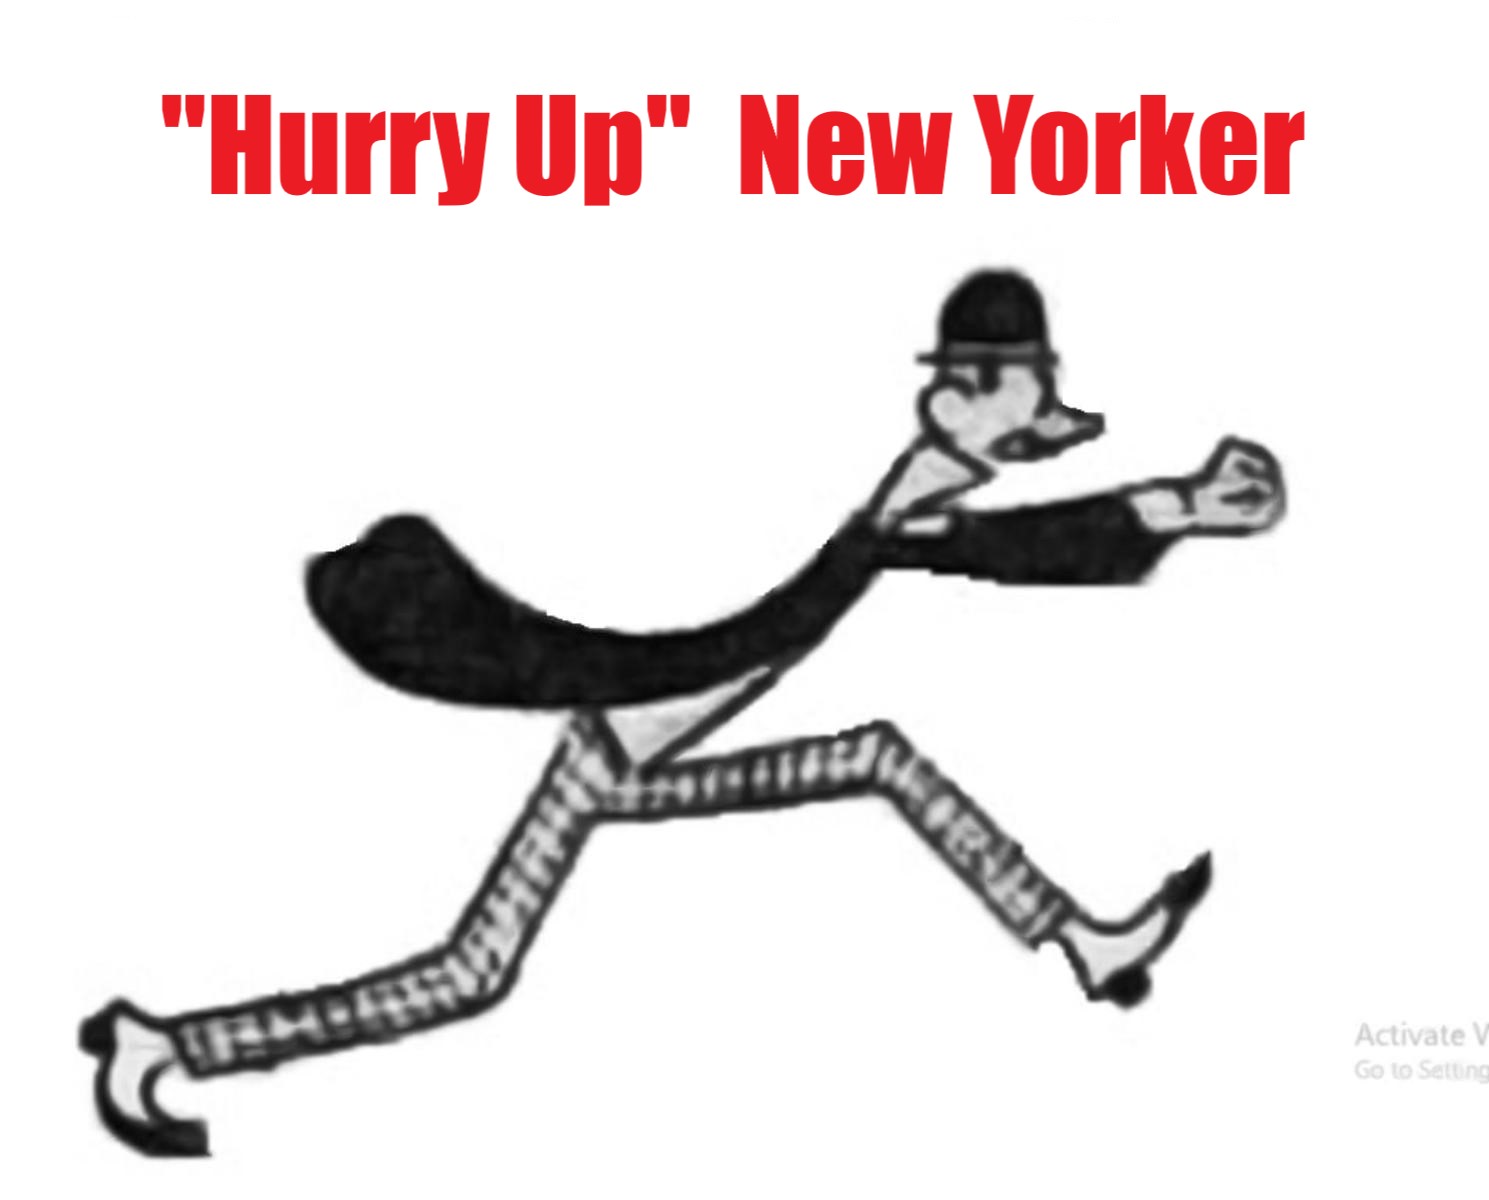 Comic Book Cover For "Hurry Up" New Yorker